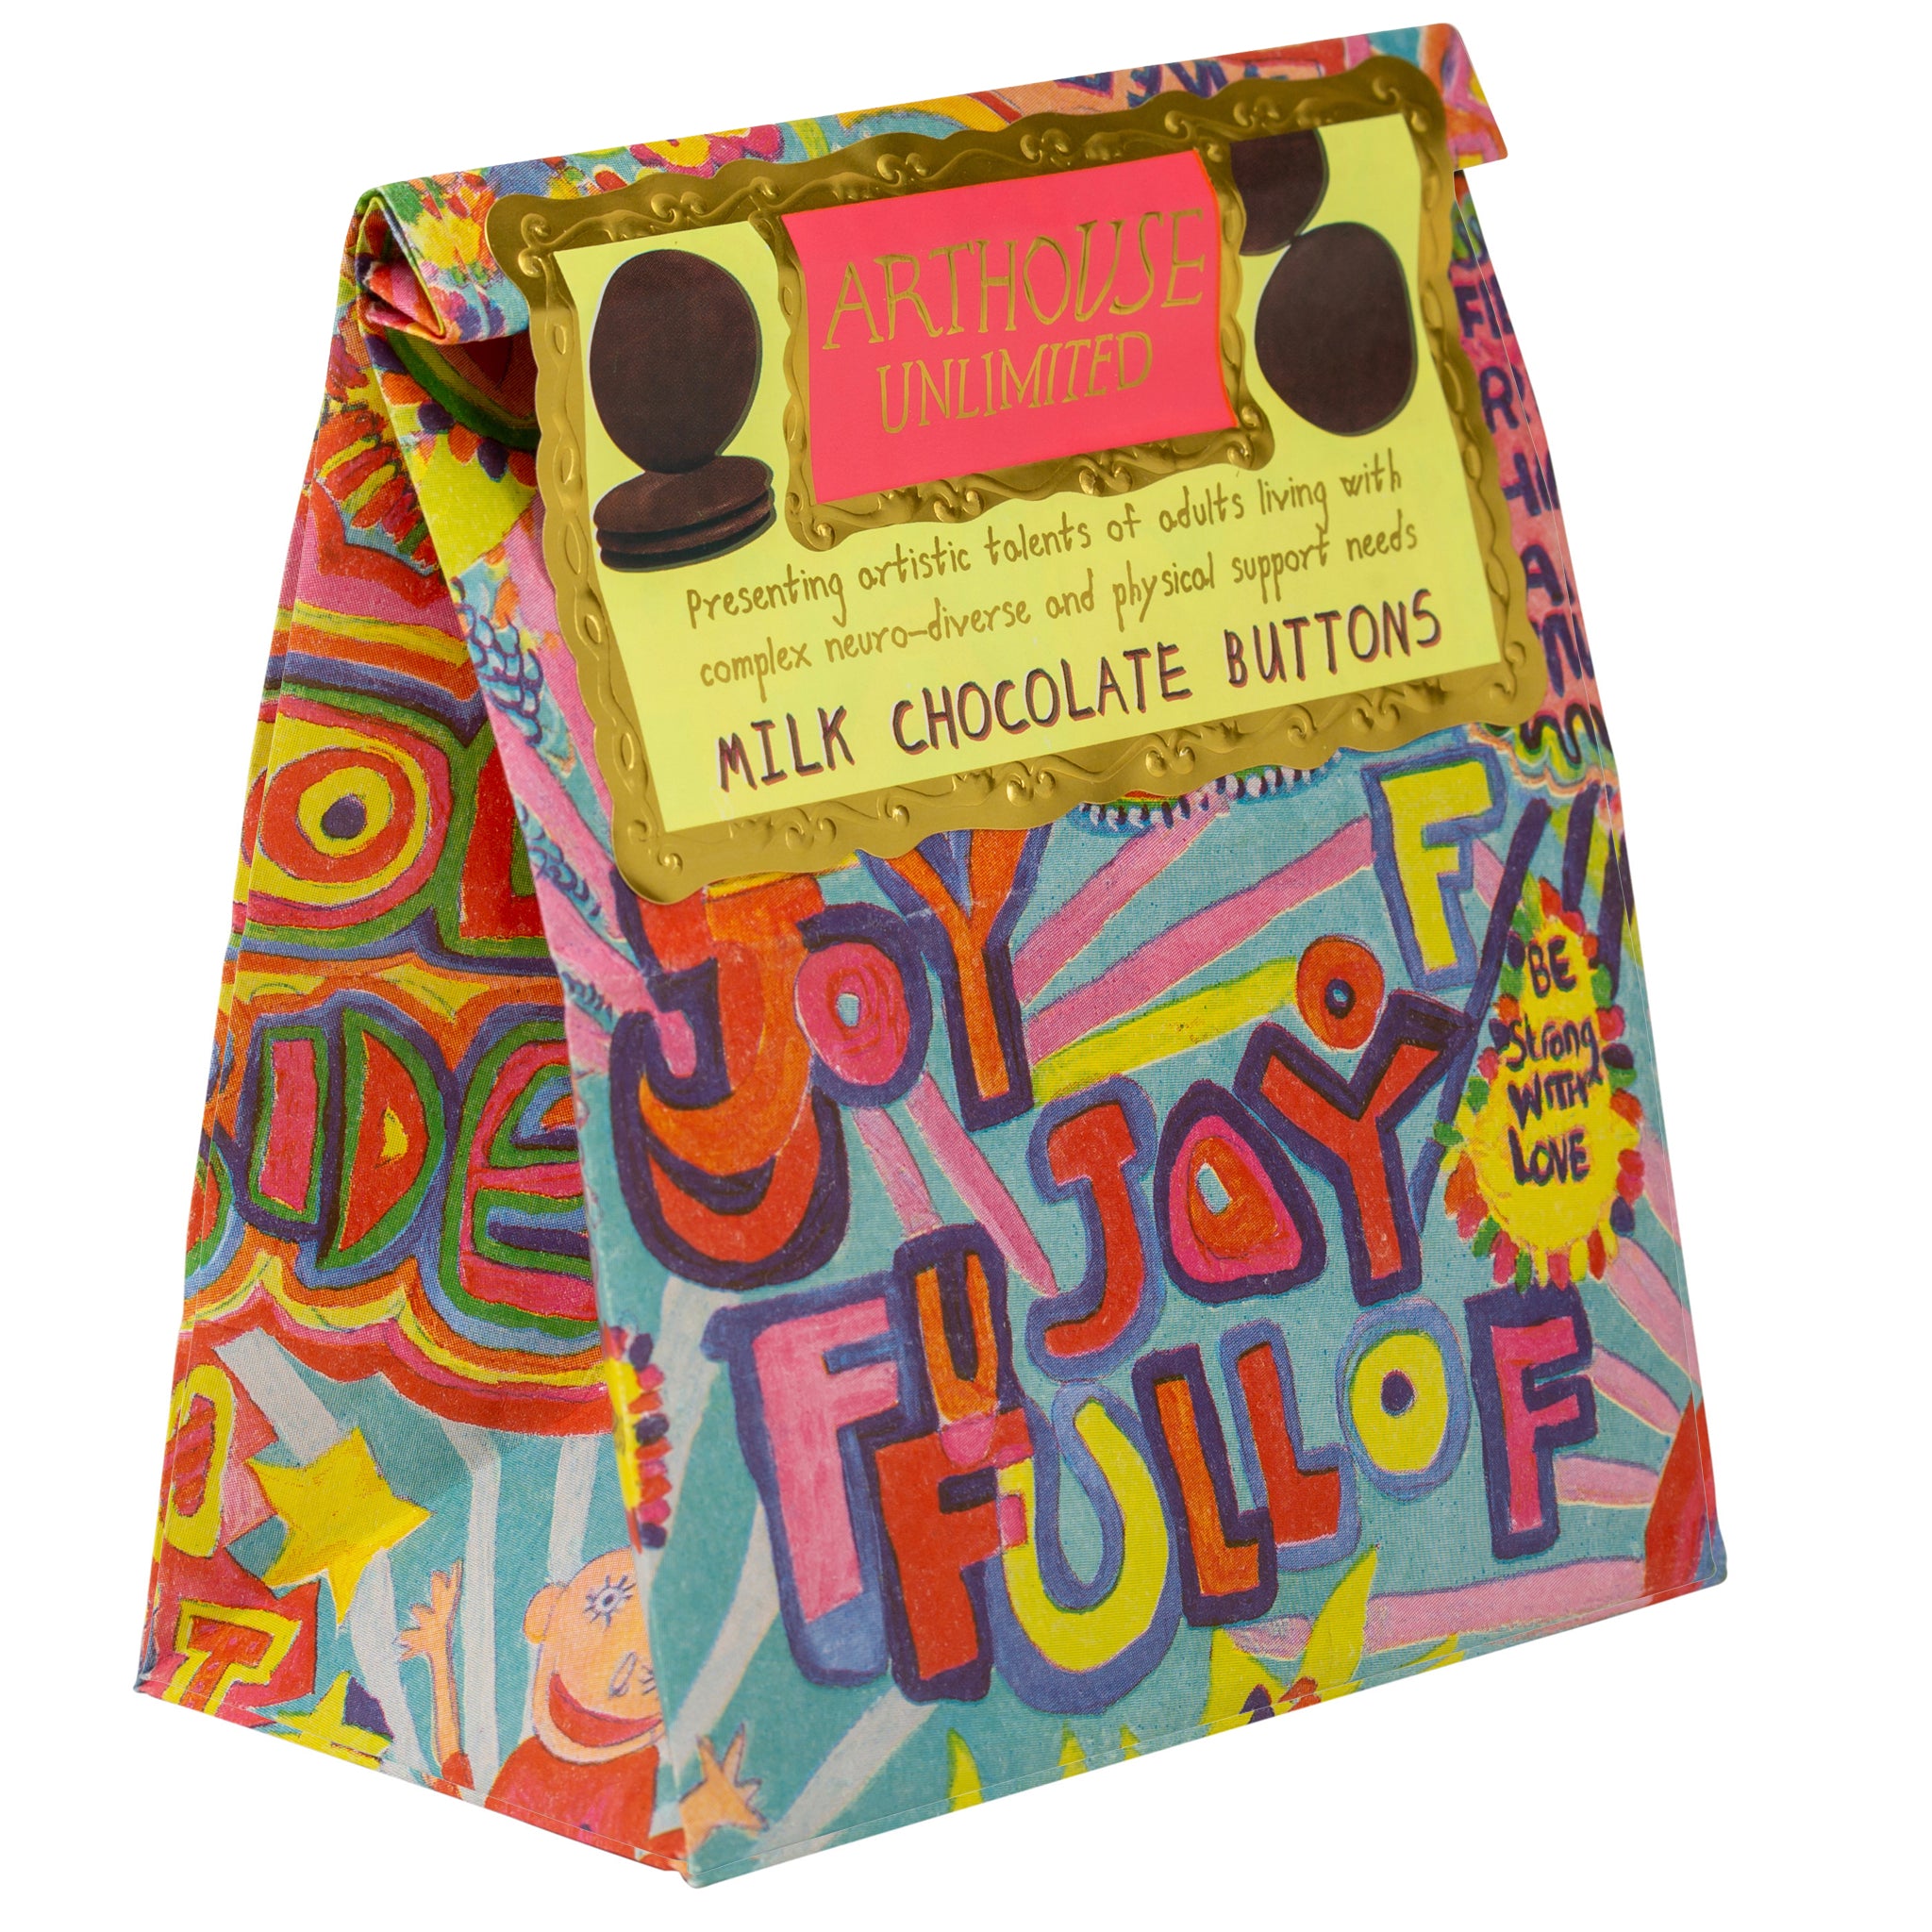 Bright coloured packet of Full of Joy, Milk Chocolate Buttons